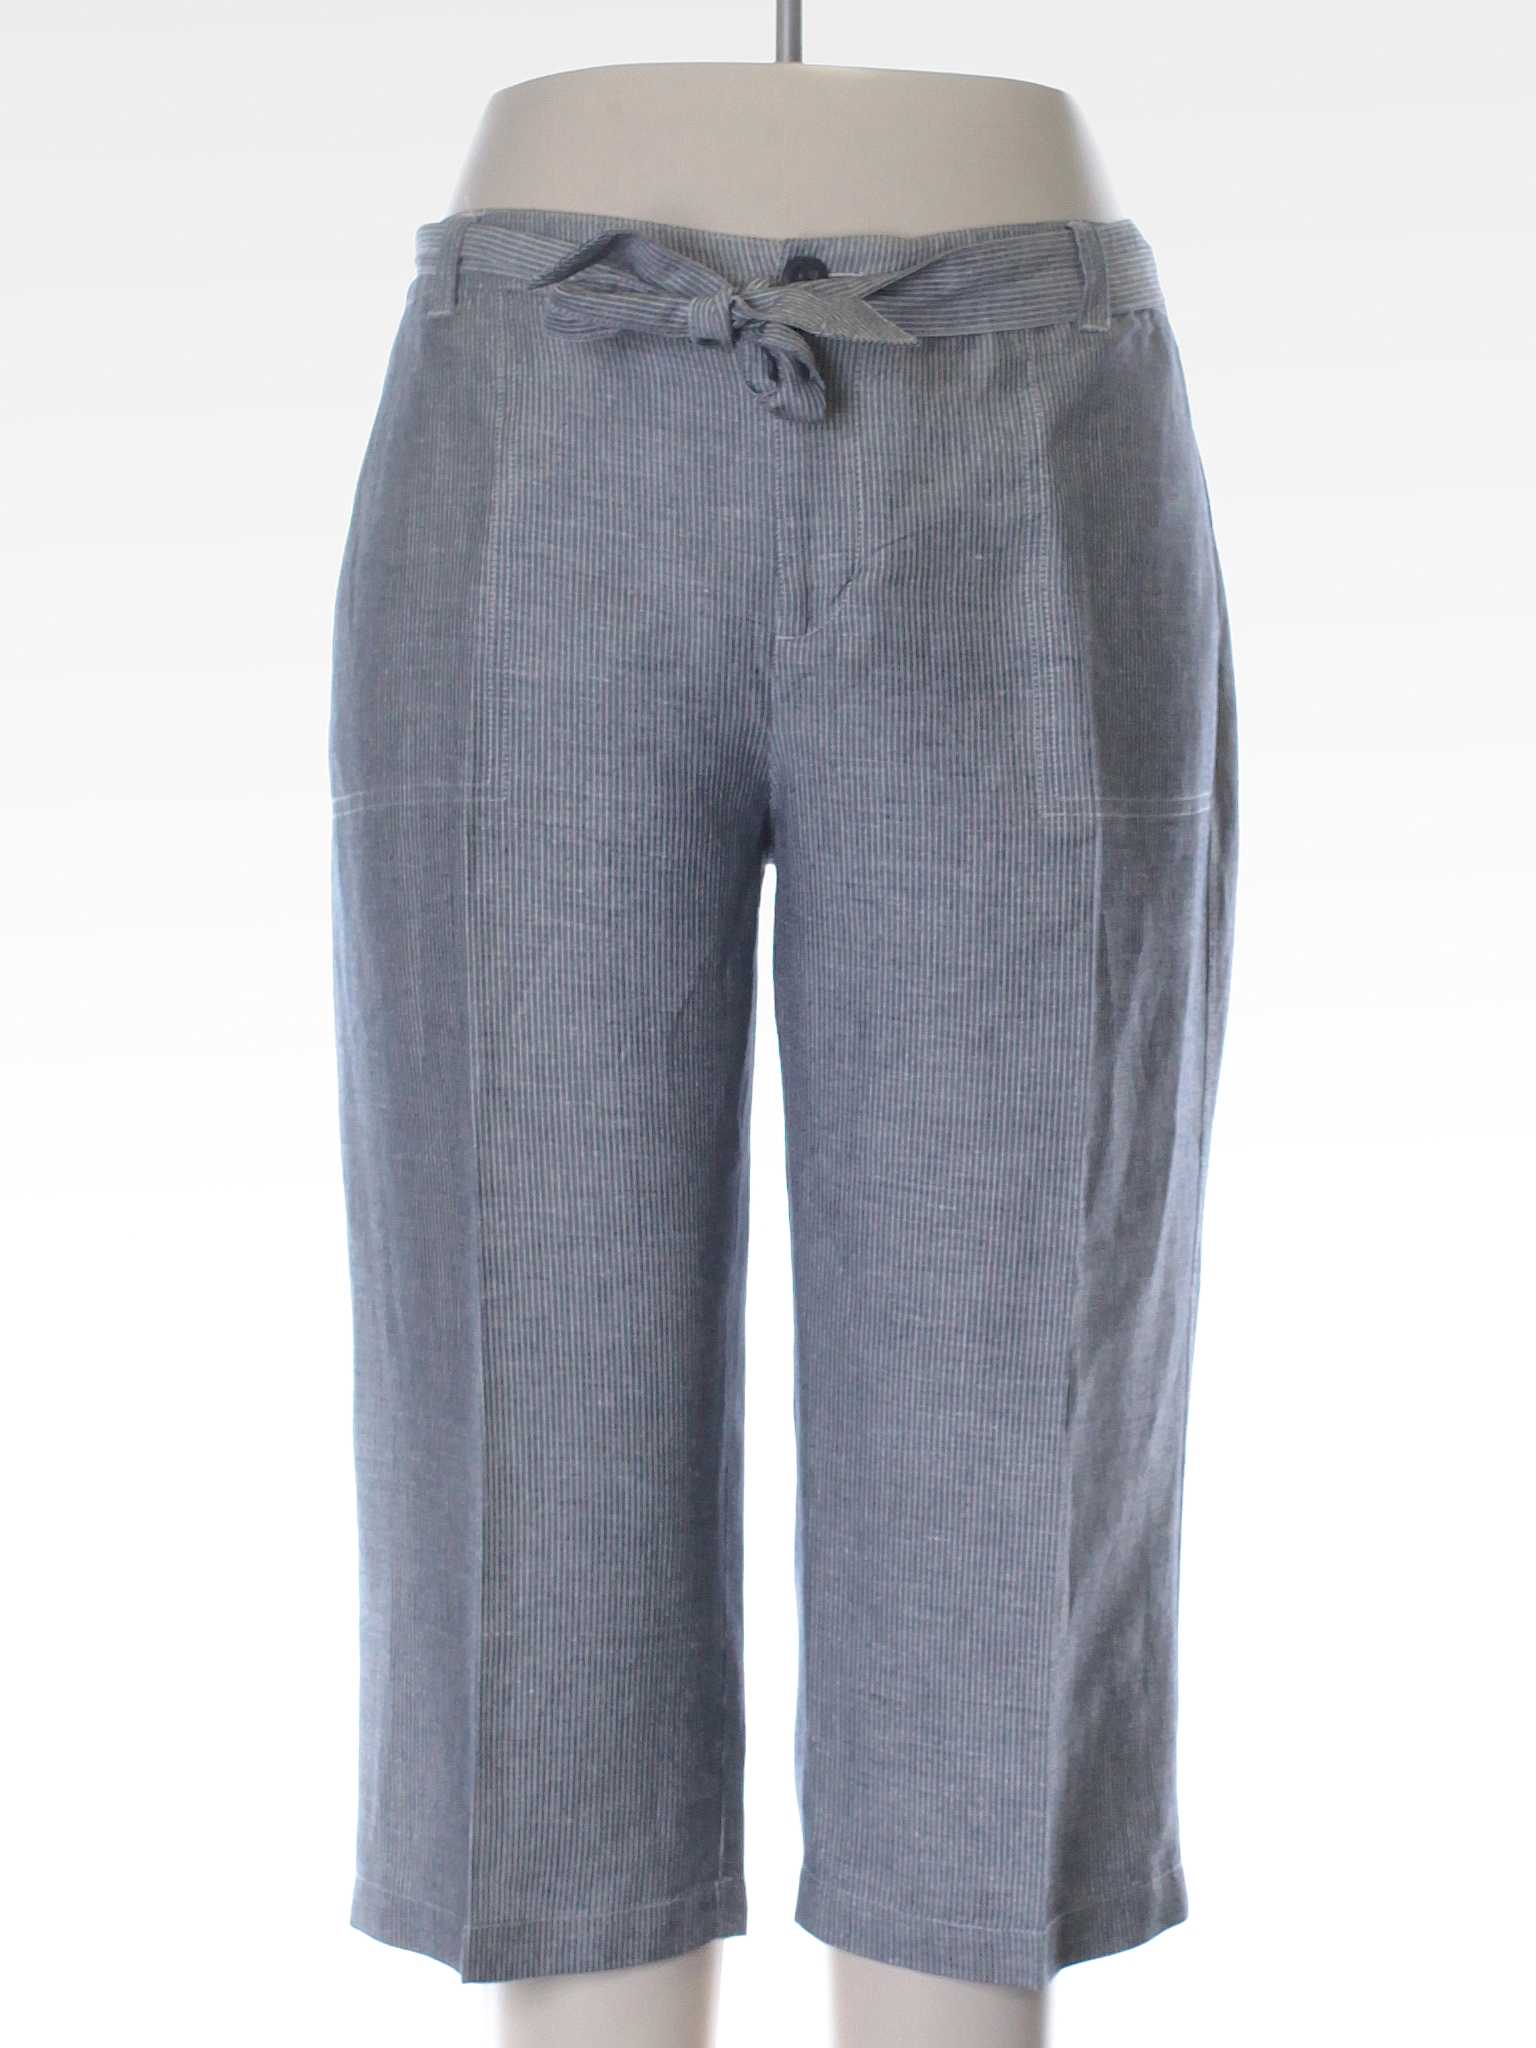 Coldwater Creek Solid Gray Linen Pants Size 14 (Petite) - 85% off | thredUP